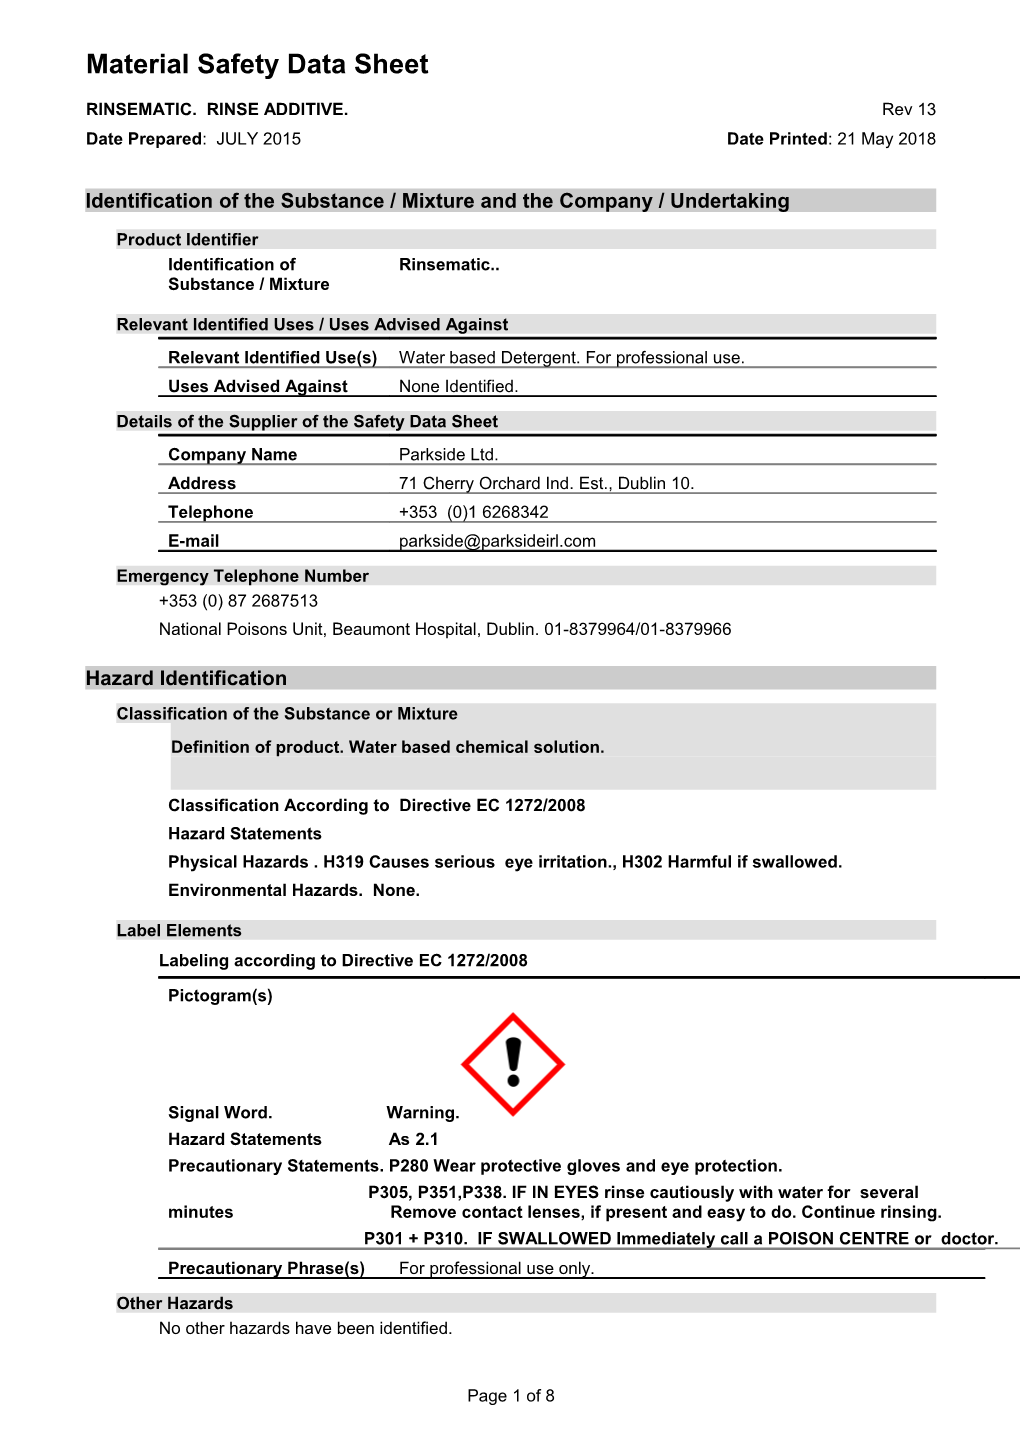 Material Safety Data Sheet s98